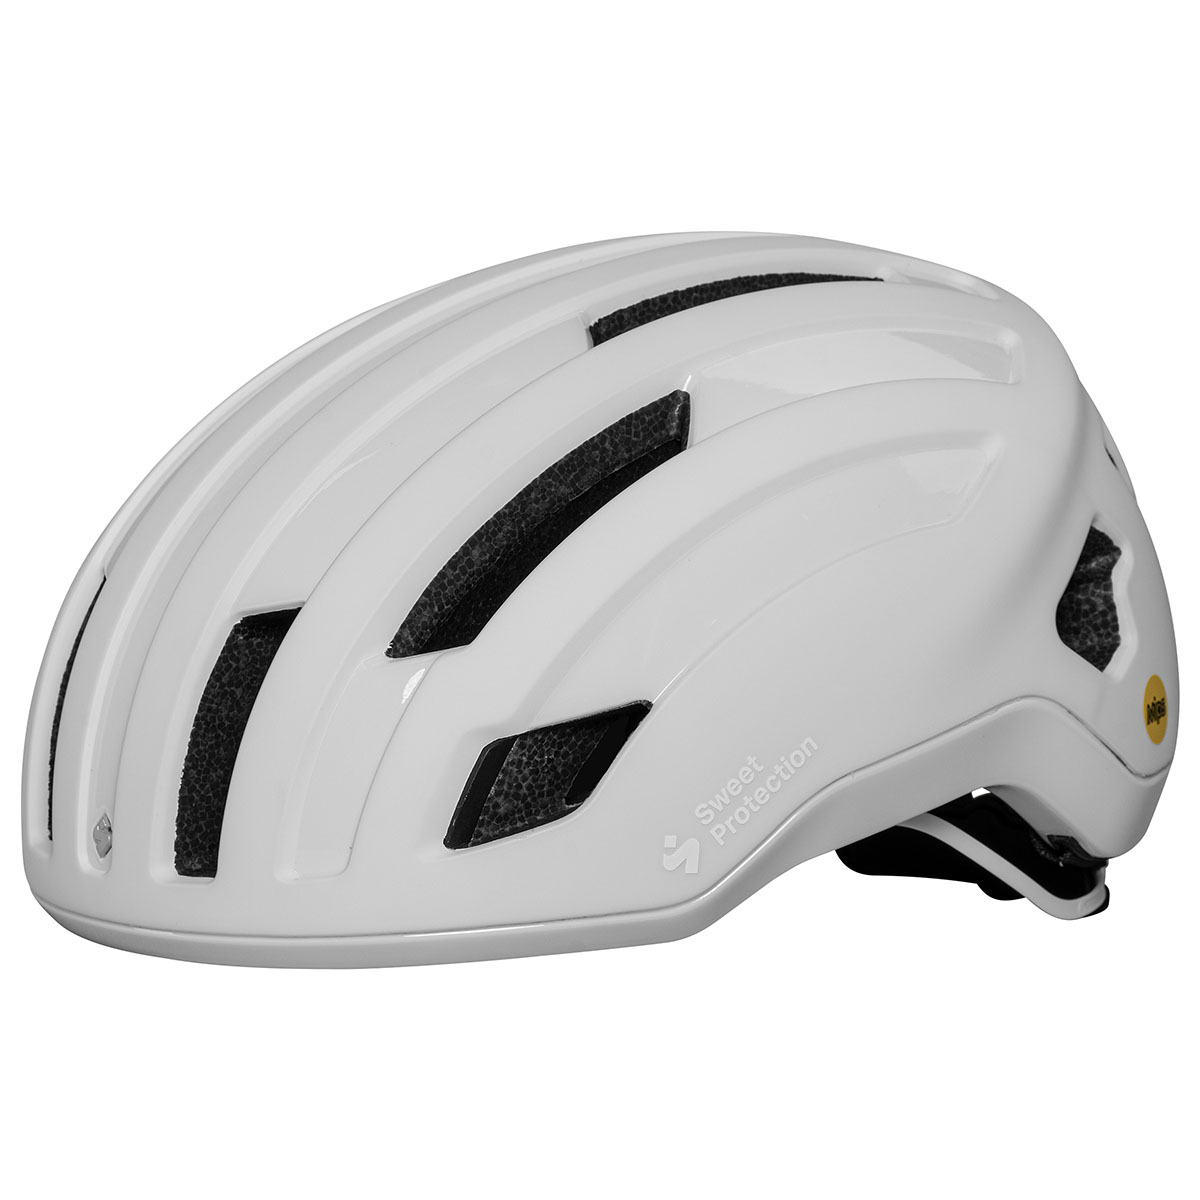 CASQUE SWEET PROTECTION OUTRIDER MIPS BLANC MAT MEDIUM